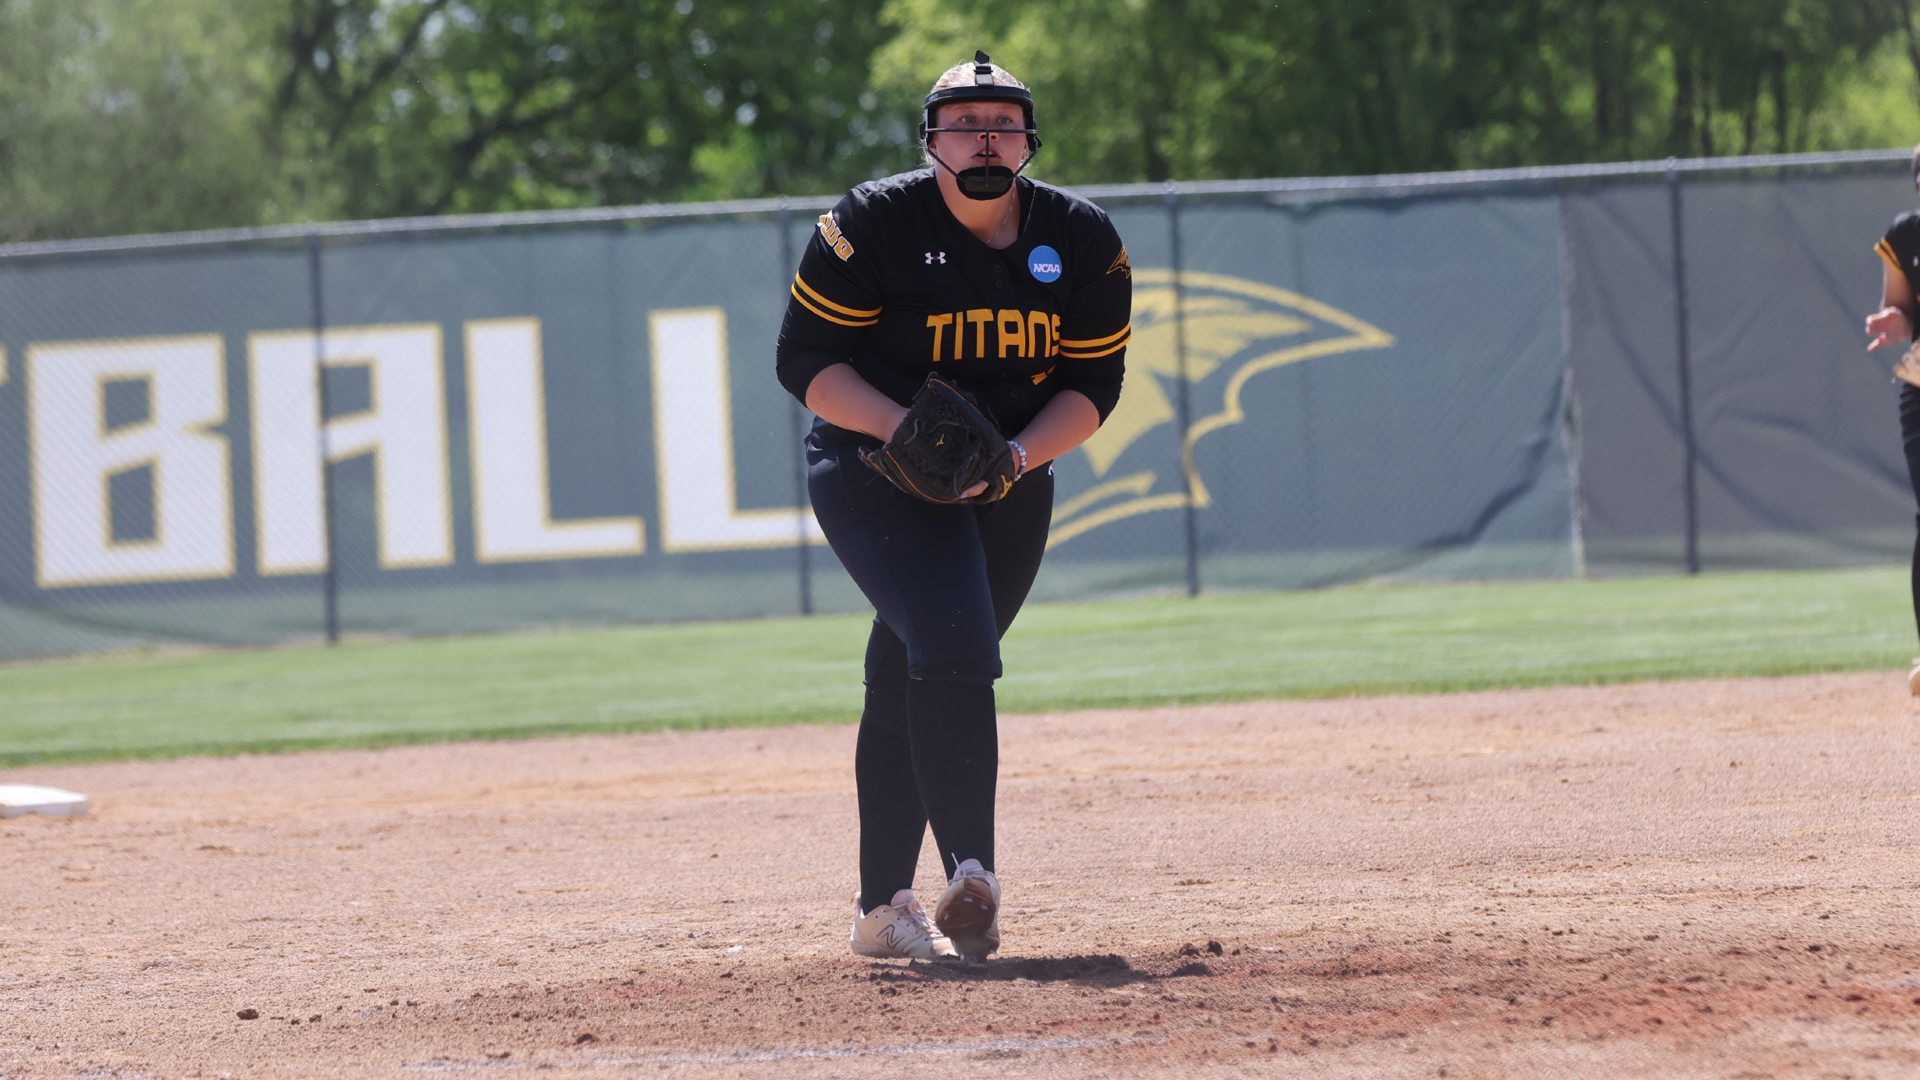 Sydney Nemetz shutout Amherst in the Titans' first game of THE Spring Games. Photo Credit: Steve Frommell, UW-Oshkosh Sports Information